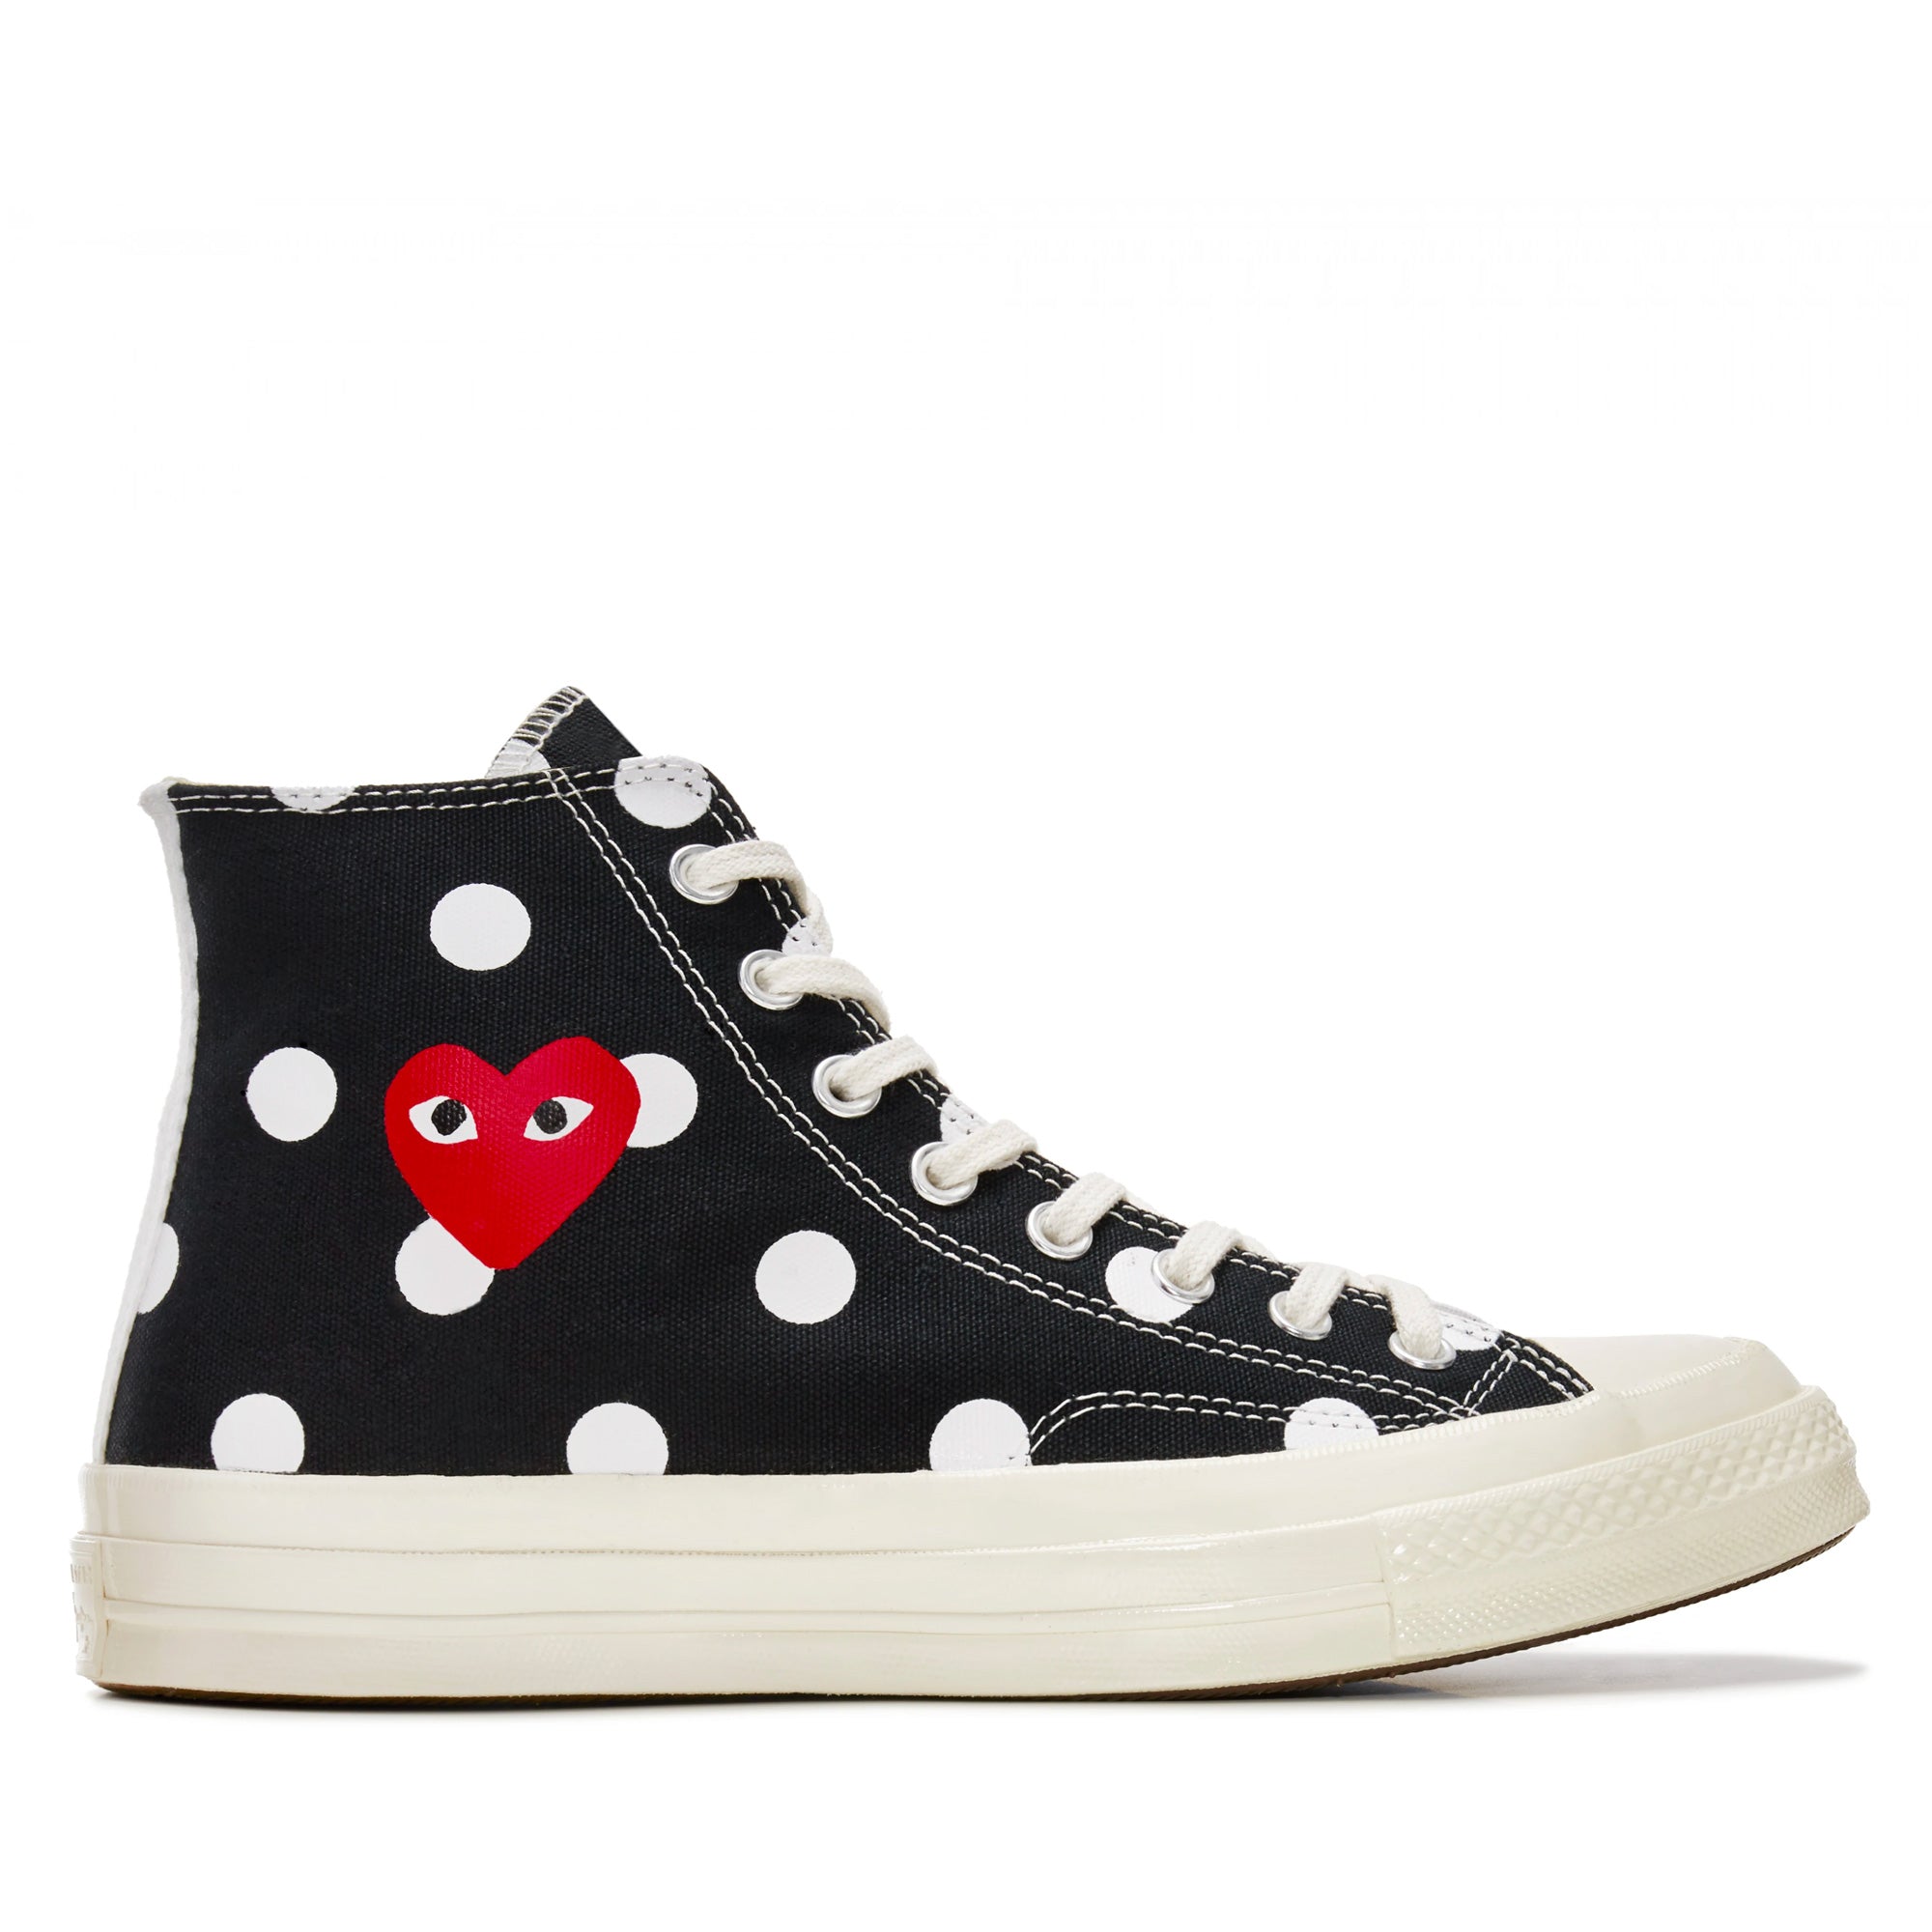 Play Converse - Polka Dot Red Heart Chuck Taylor All Star ’70 High Sneakers - (Black) view 1